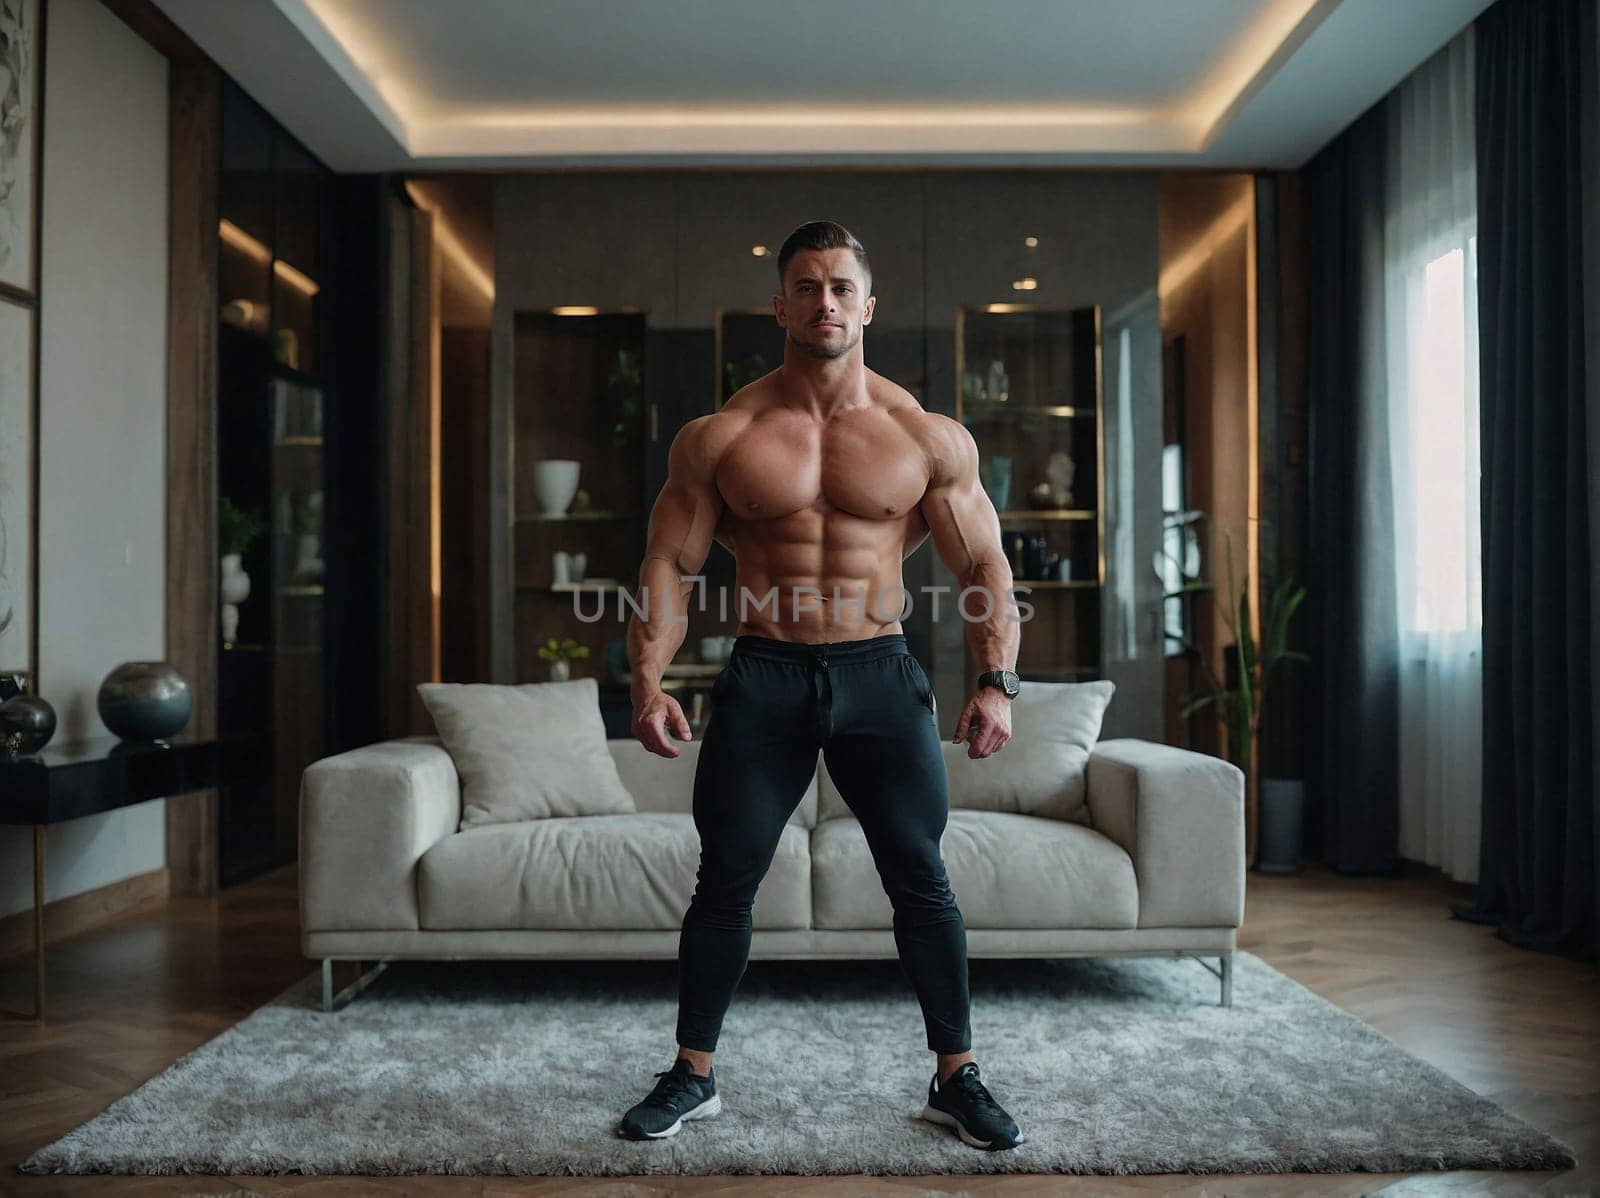 A shirtless man standing inside a living room, showcasing a calm and casual atmosphere.